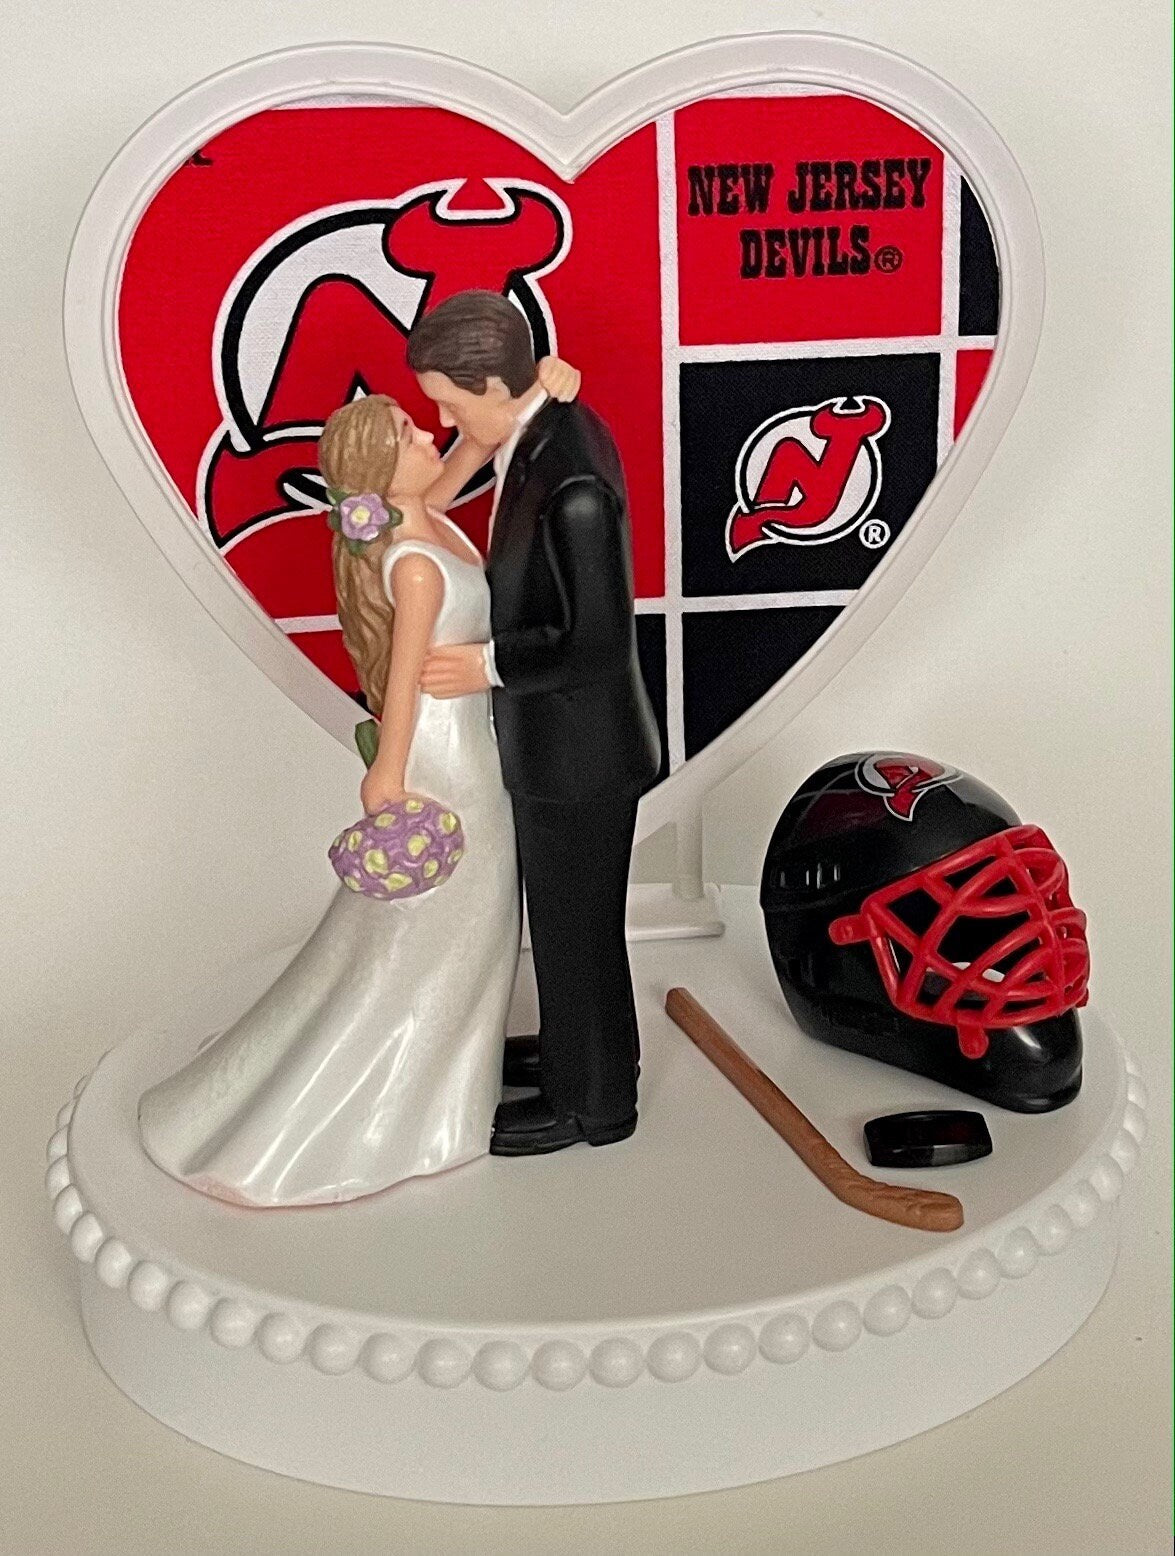 Wedding Cake Topper New Jersey Devils Hockey Themed Beautiful Long-Haired Bride and Groom Fun Groom's Cake Top Shower Gift Idea Reception